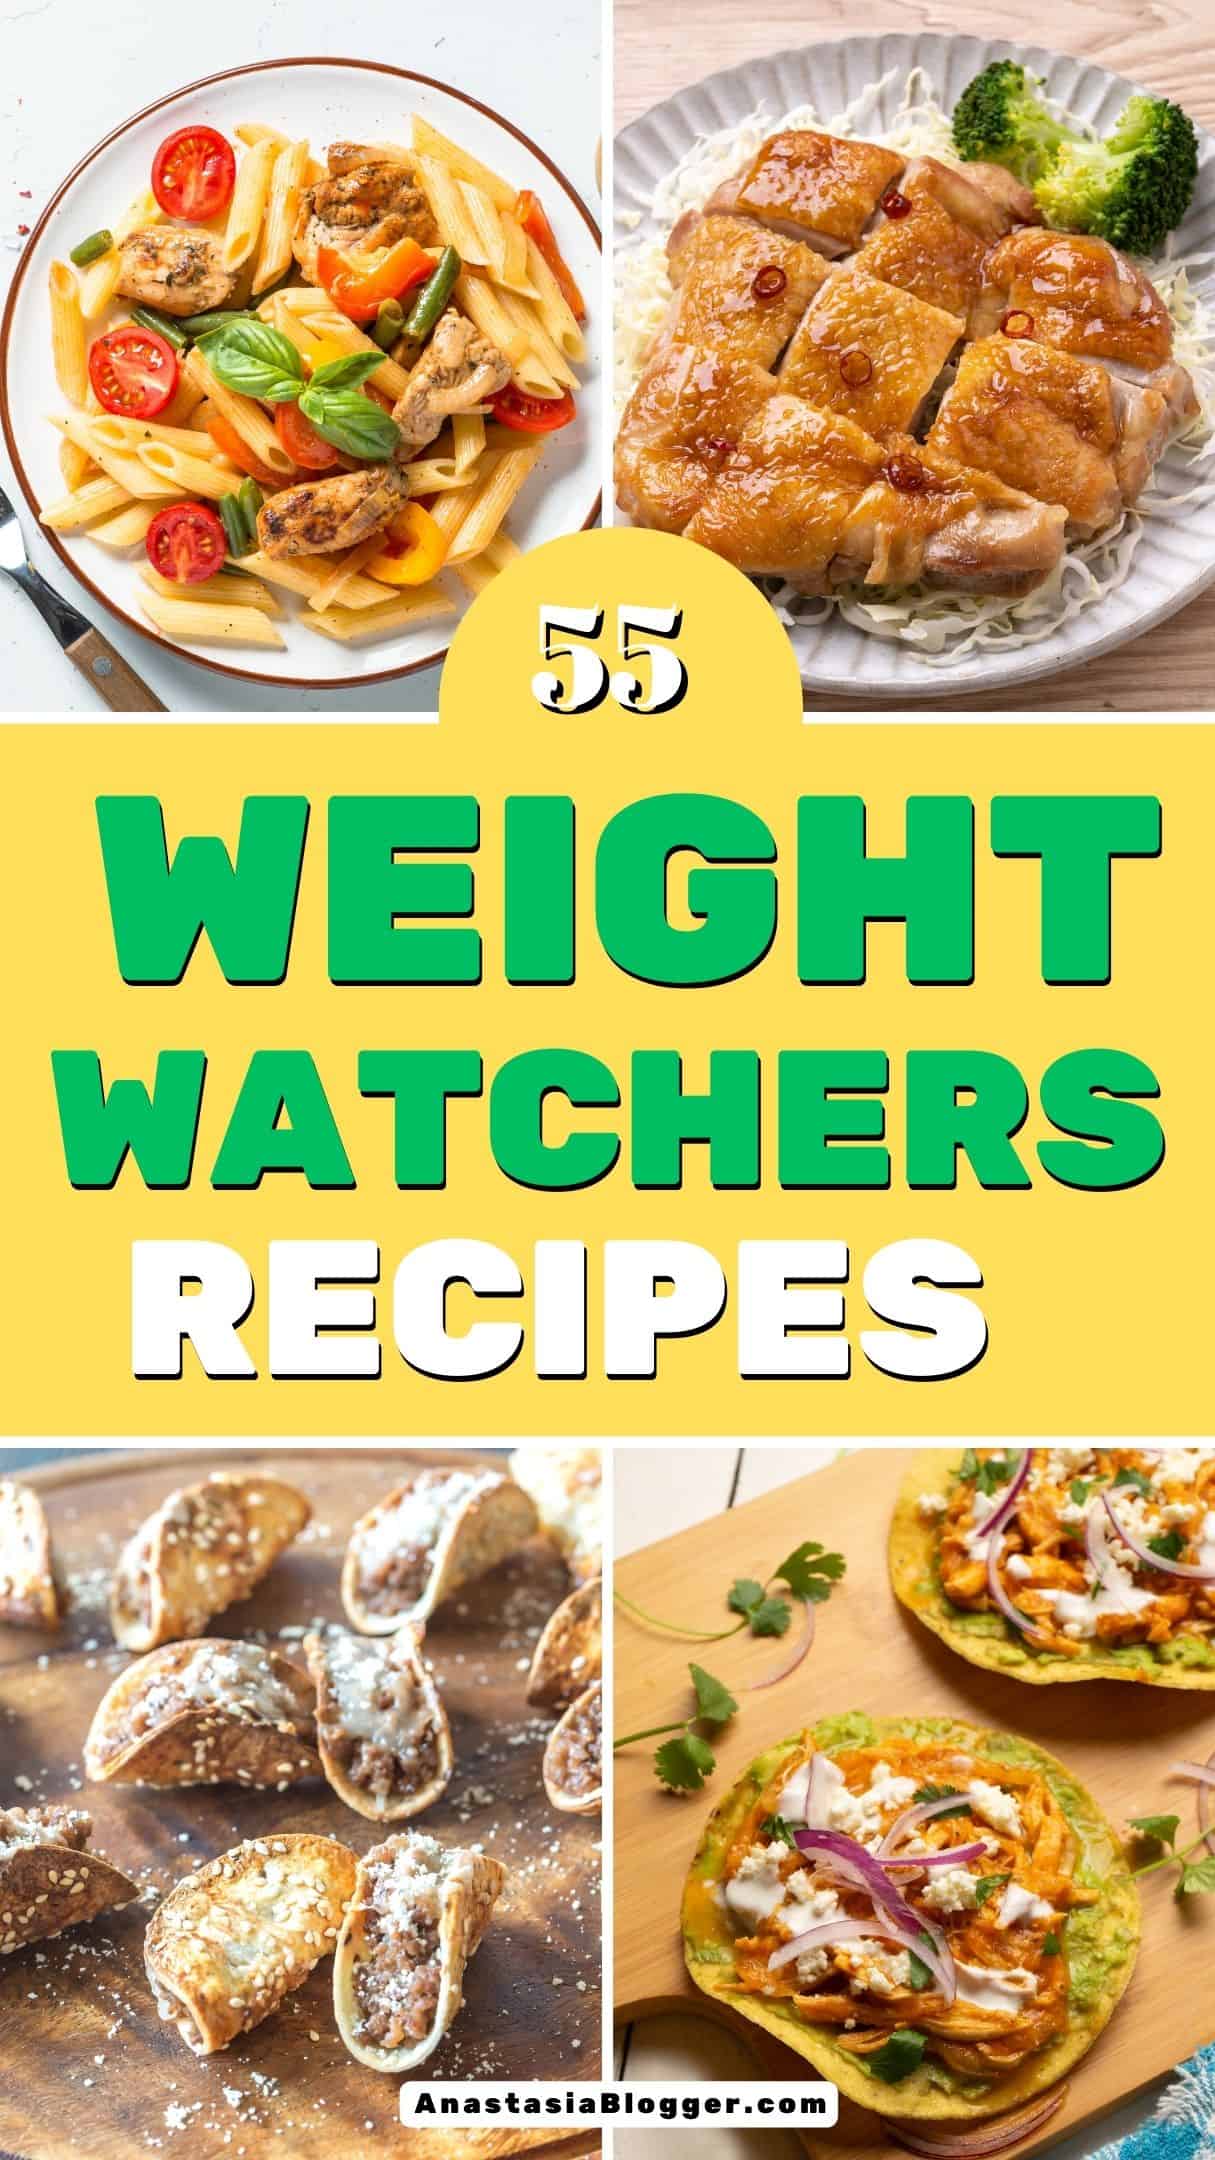  WEIGHT WATCHERS RECIPES DINNER IDEAS WITH SMARTPOINTS